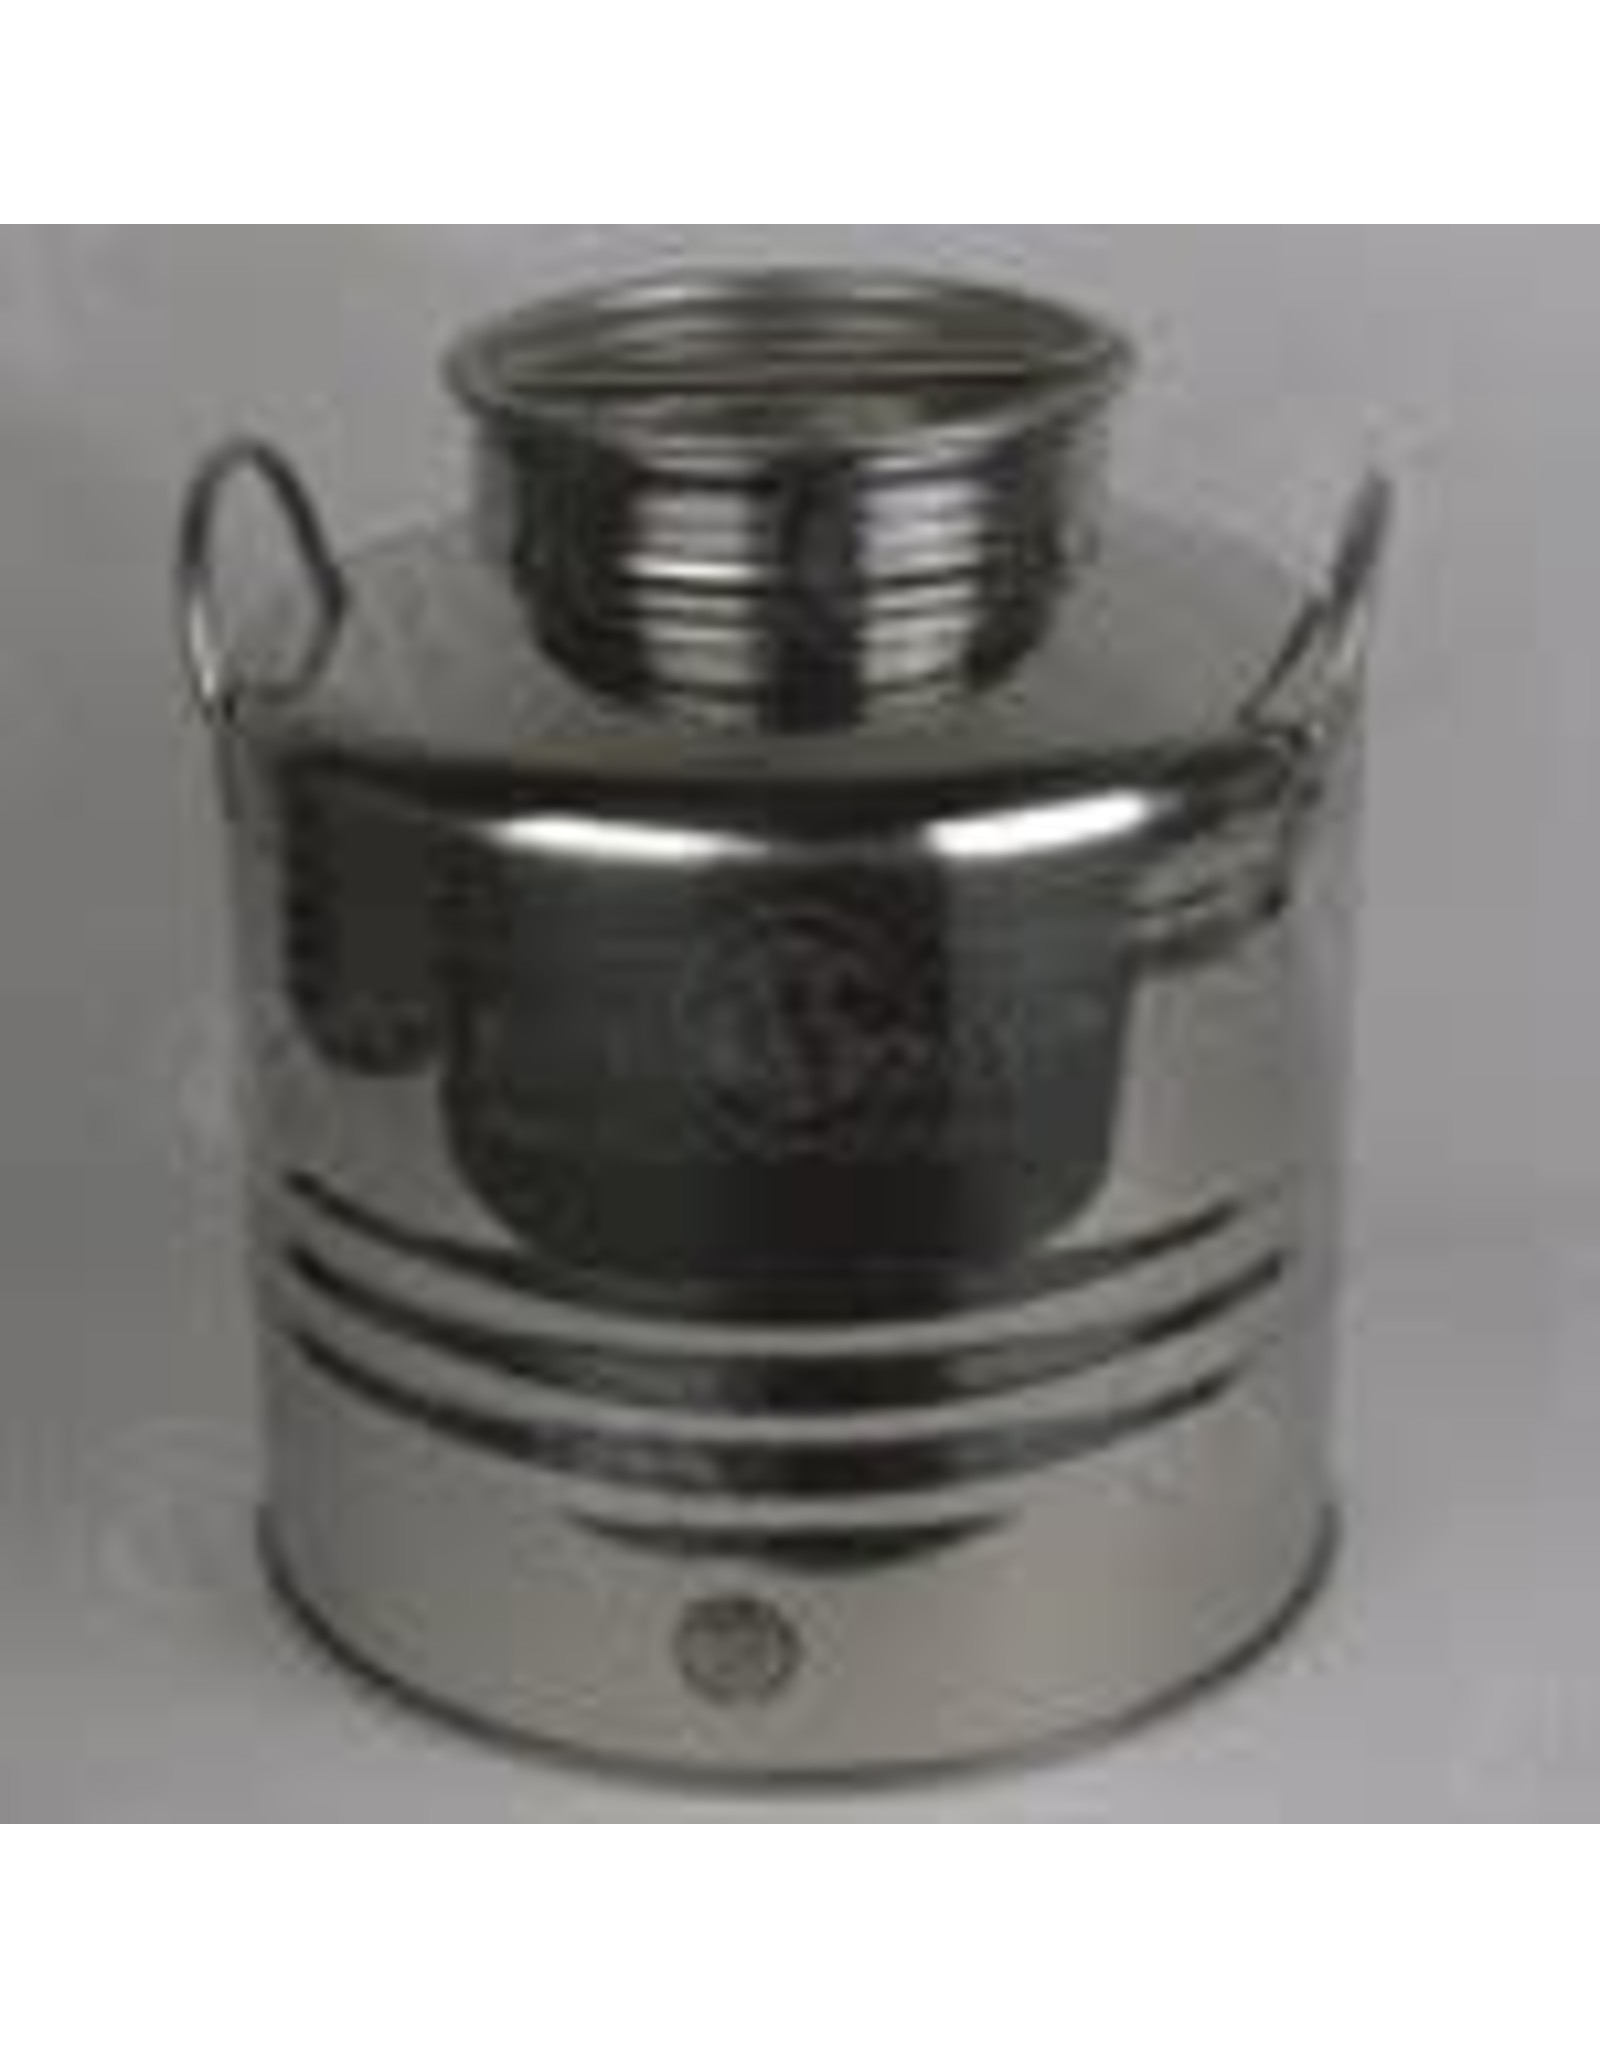 SUPERFUSTINOX 30L STAINLESS OLIVE OIL DRUM